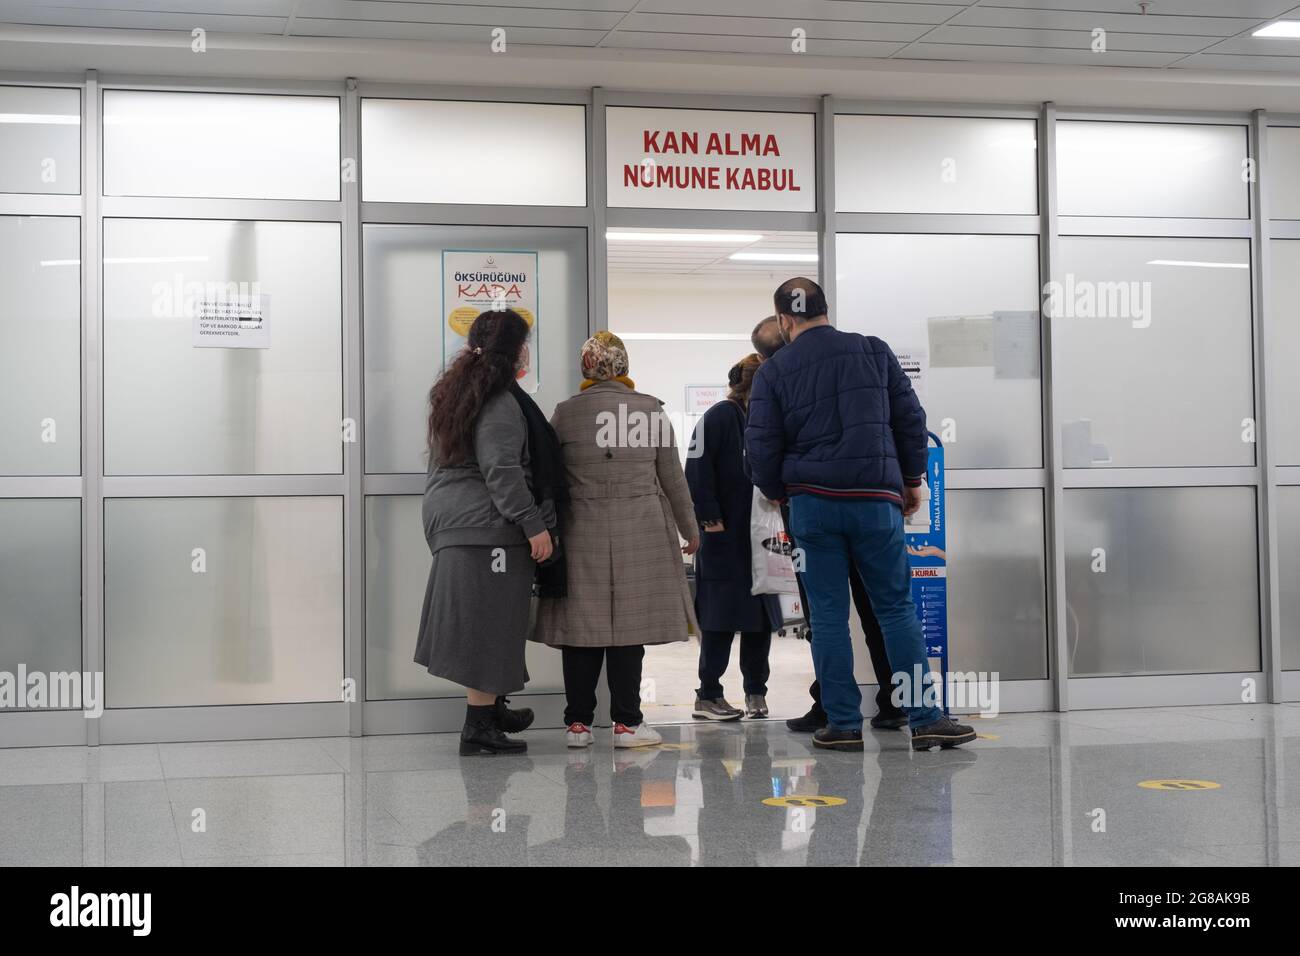 Beyoglu, Istanbul, Turkey - 02.17.2021: people waiting in front of door of blood test room in Taksim Training and Research Hospital in pandemia days w Stock Photo